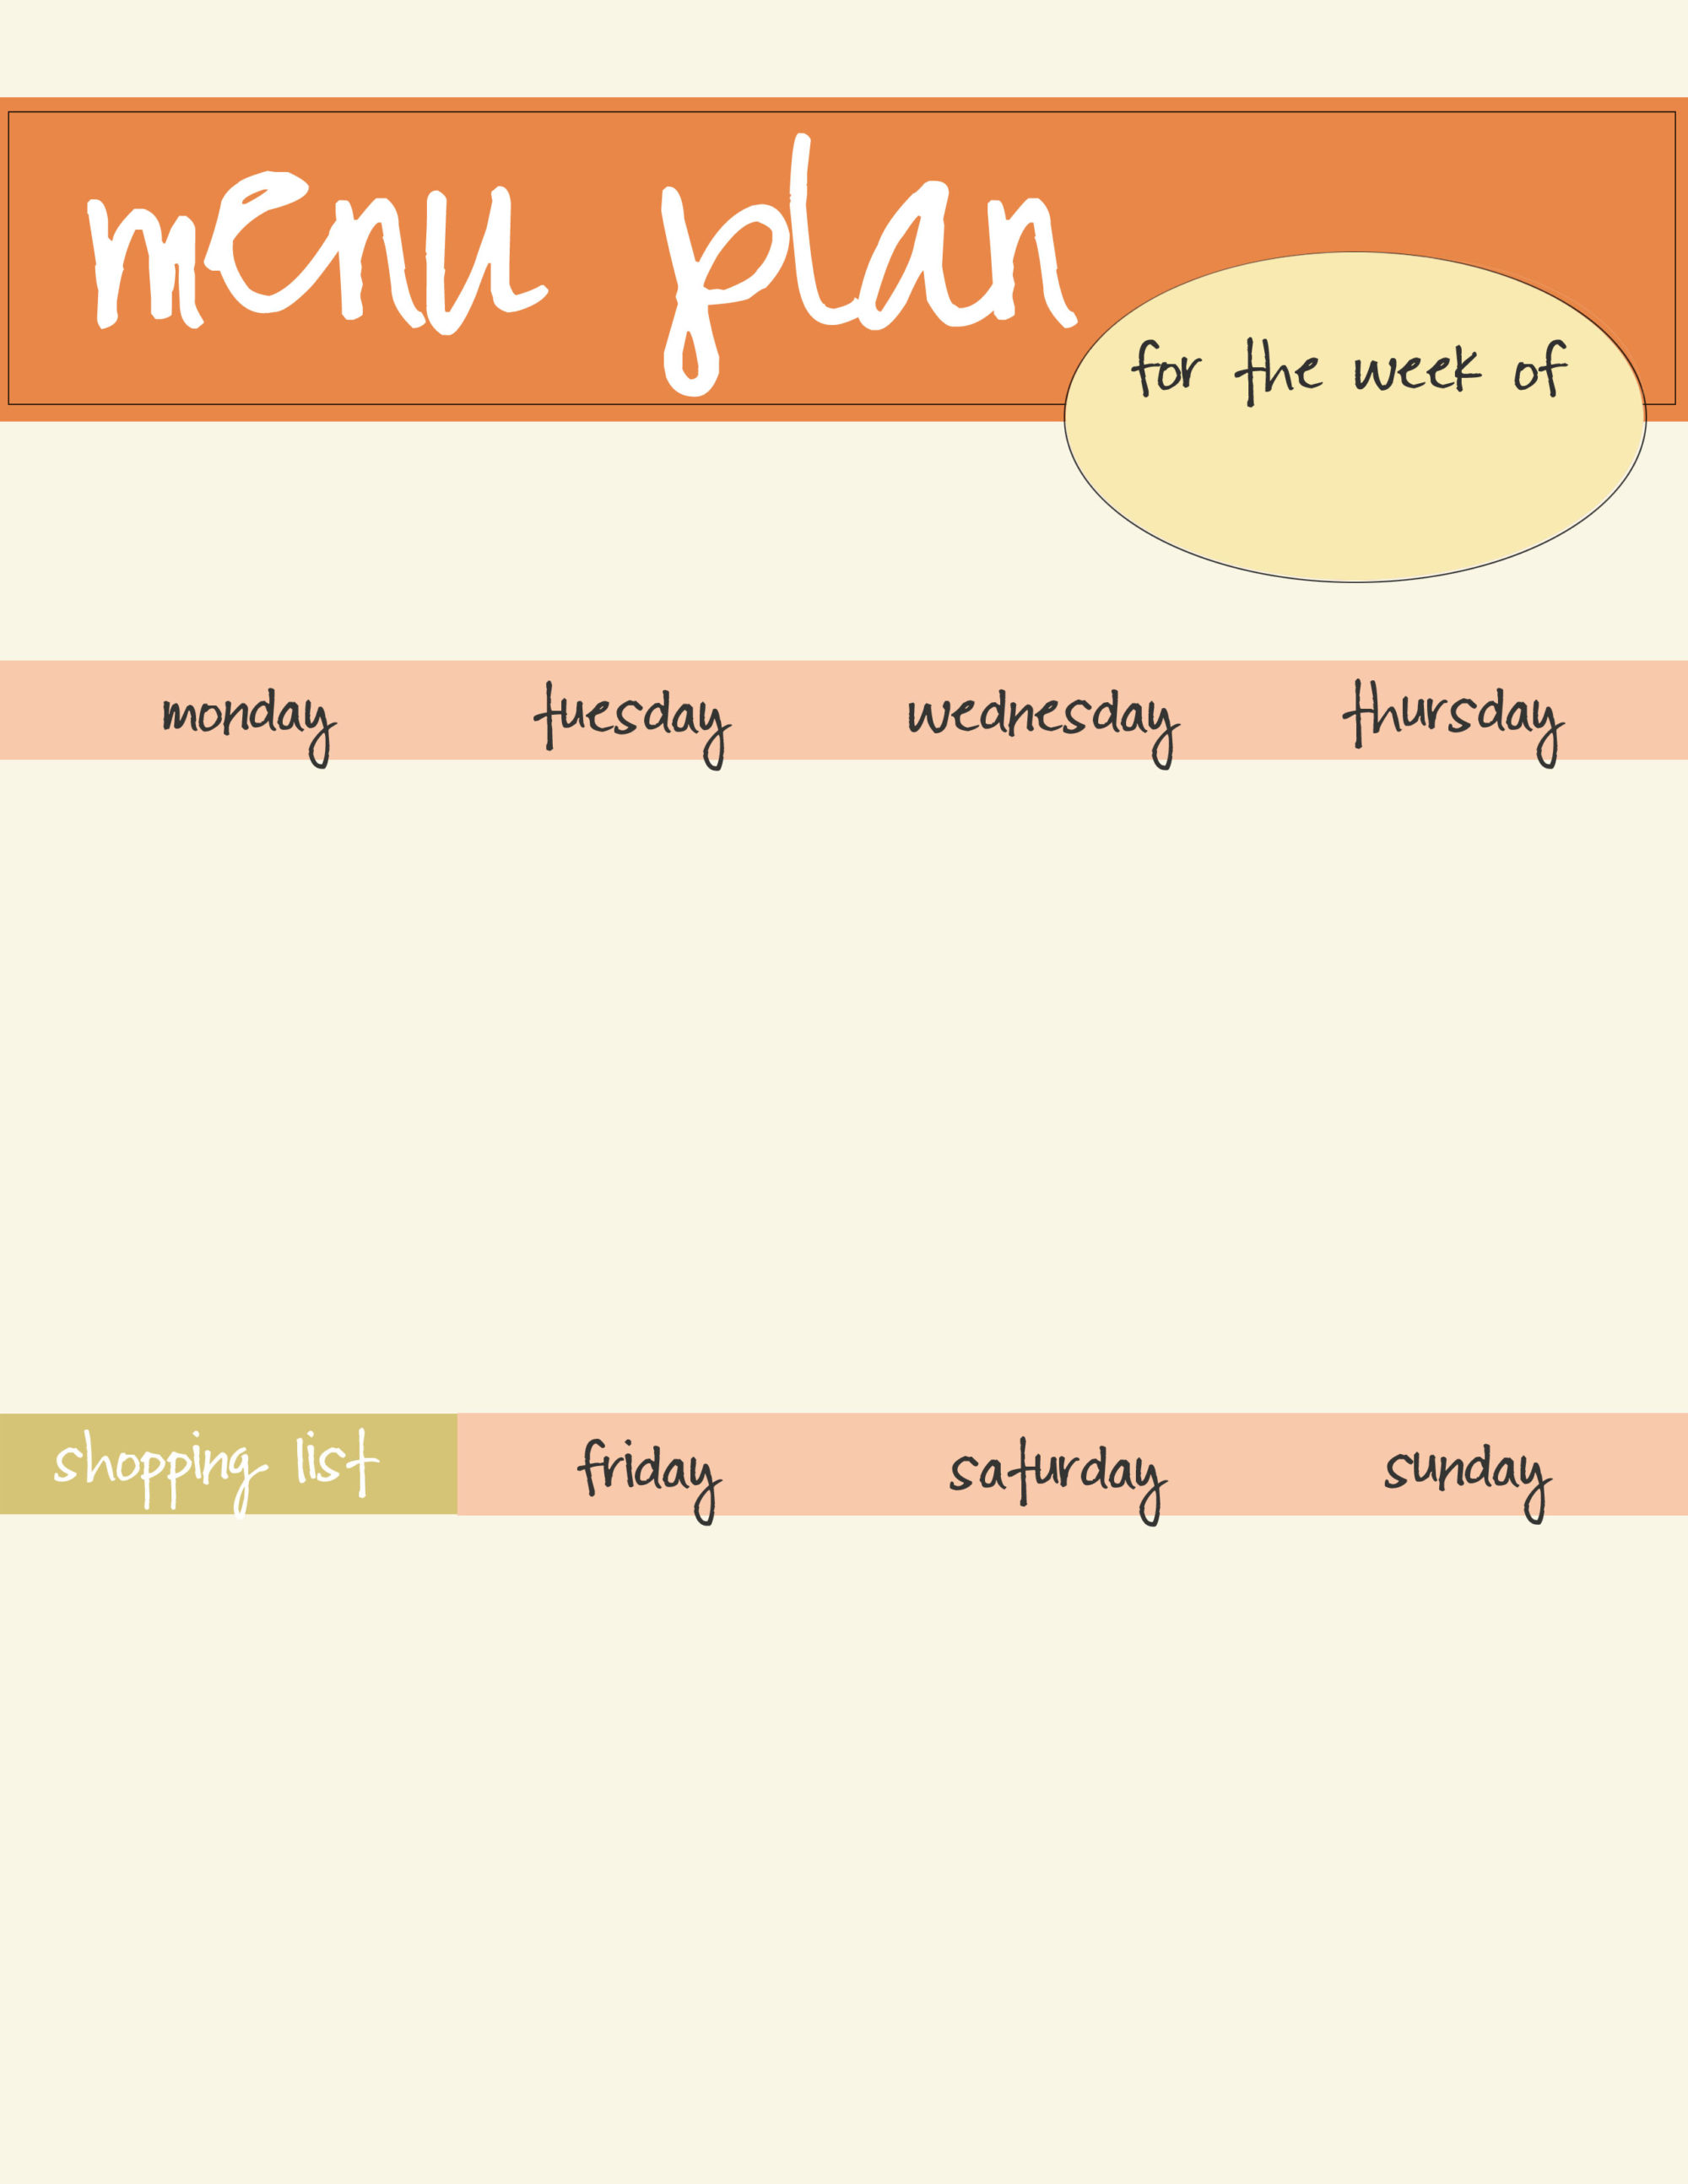 Free Menu Planning Template from livecrafteat.com